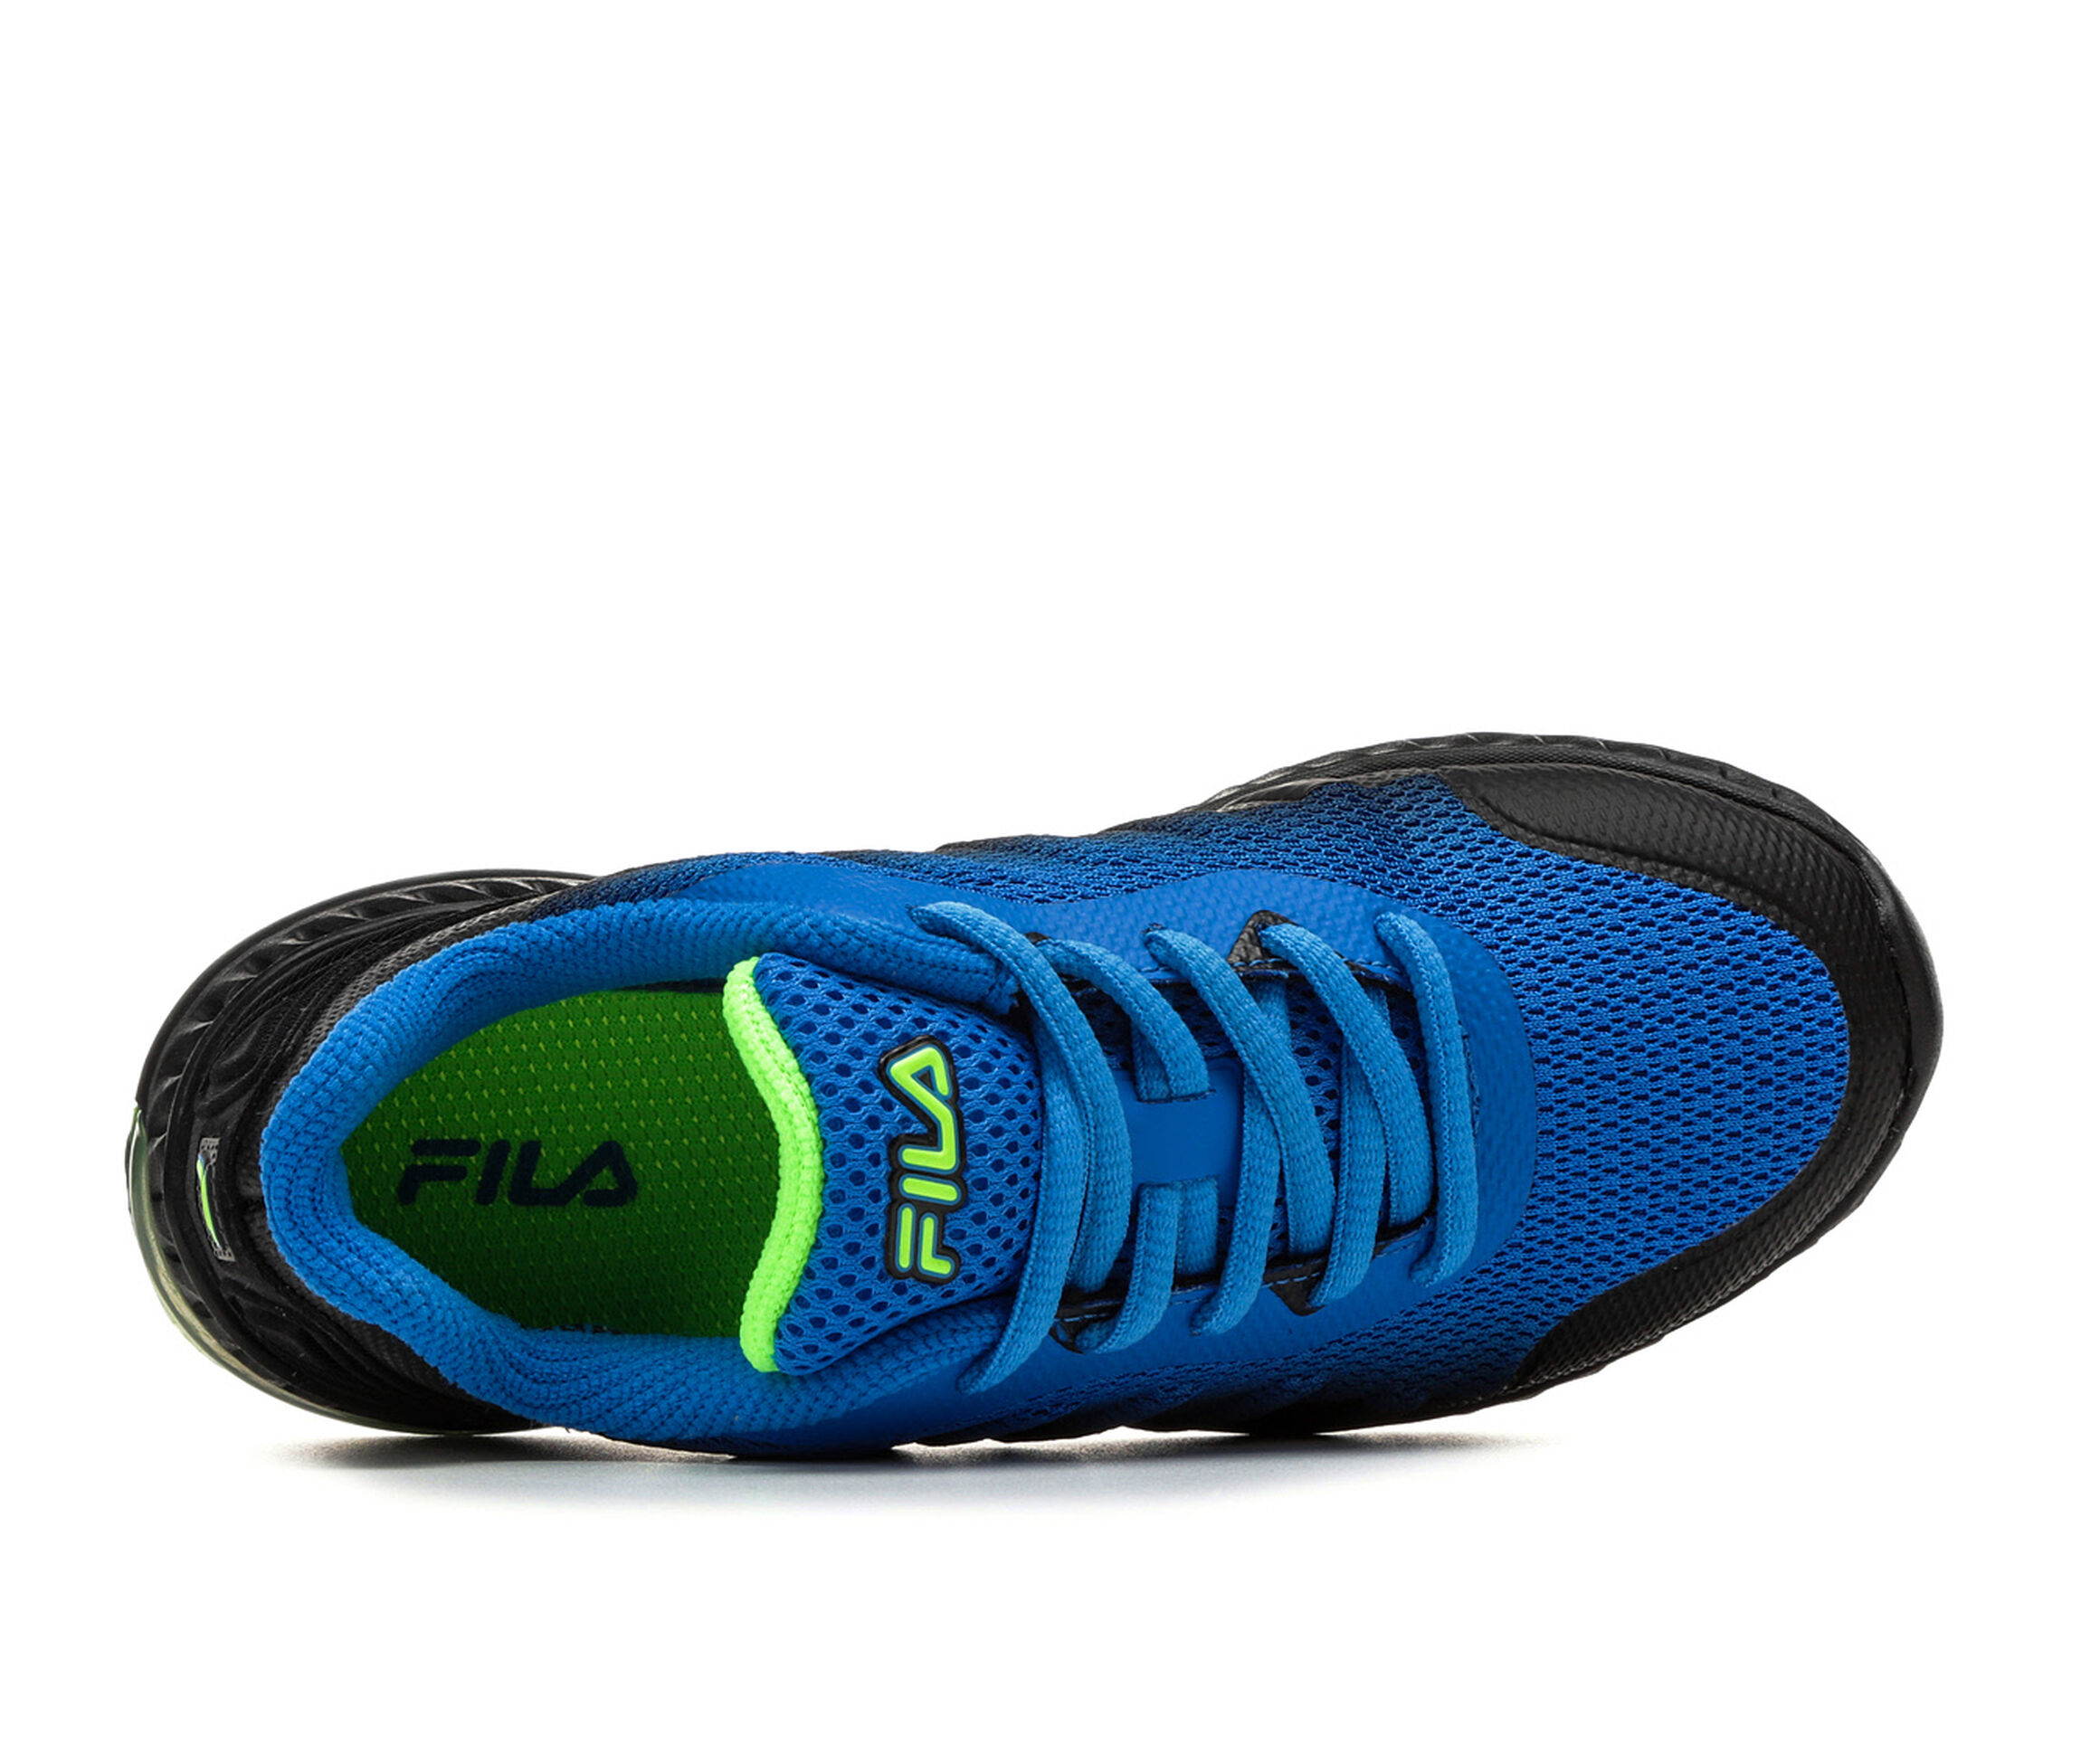 FILA Shoes, Sneakers & Accessories | Shoe Carnival